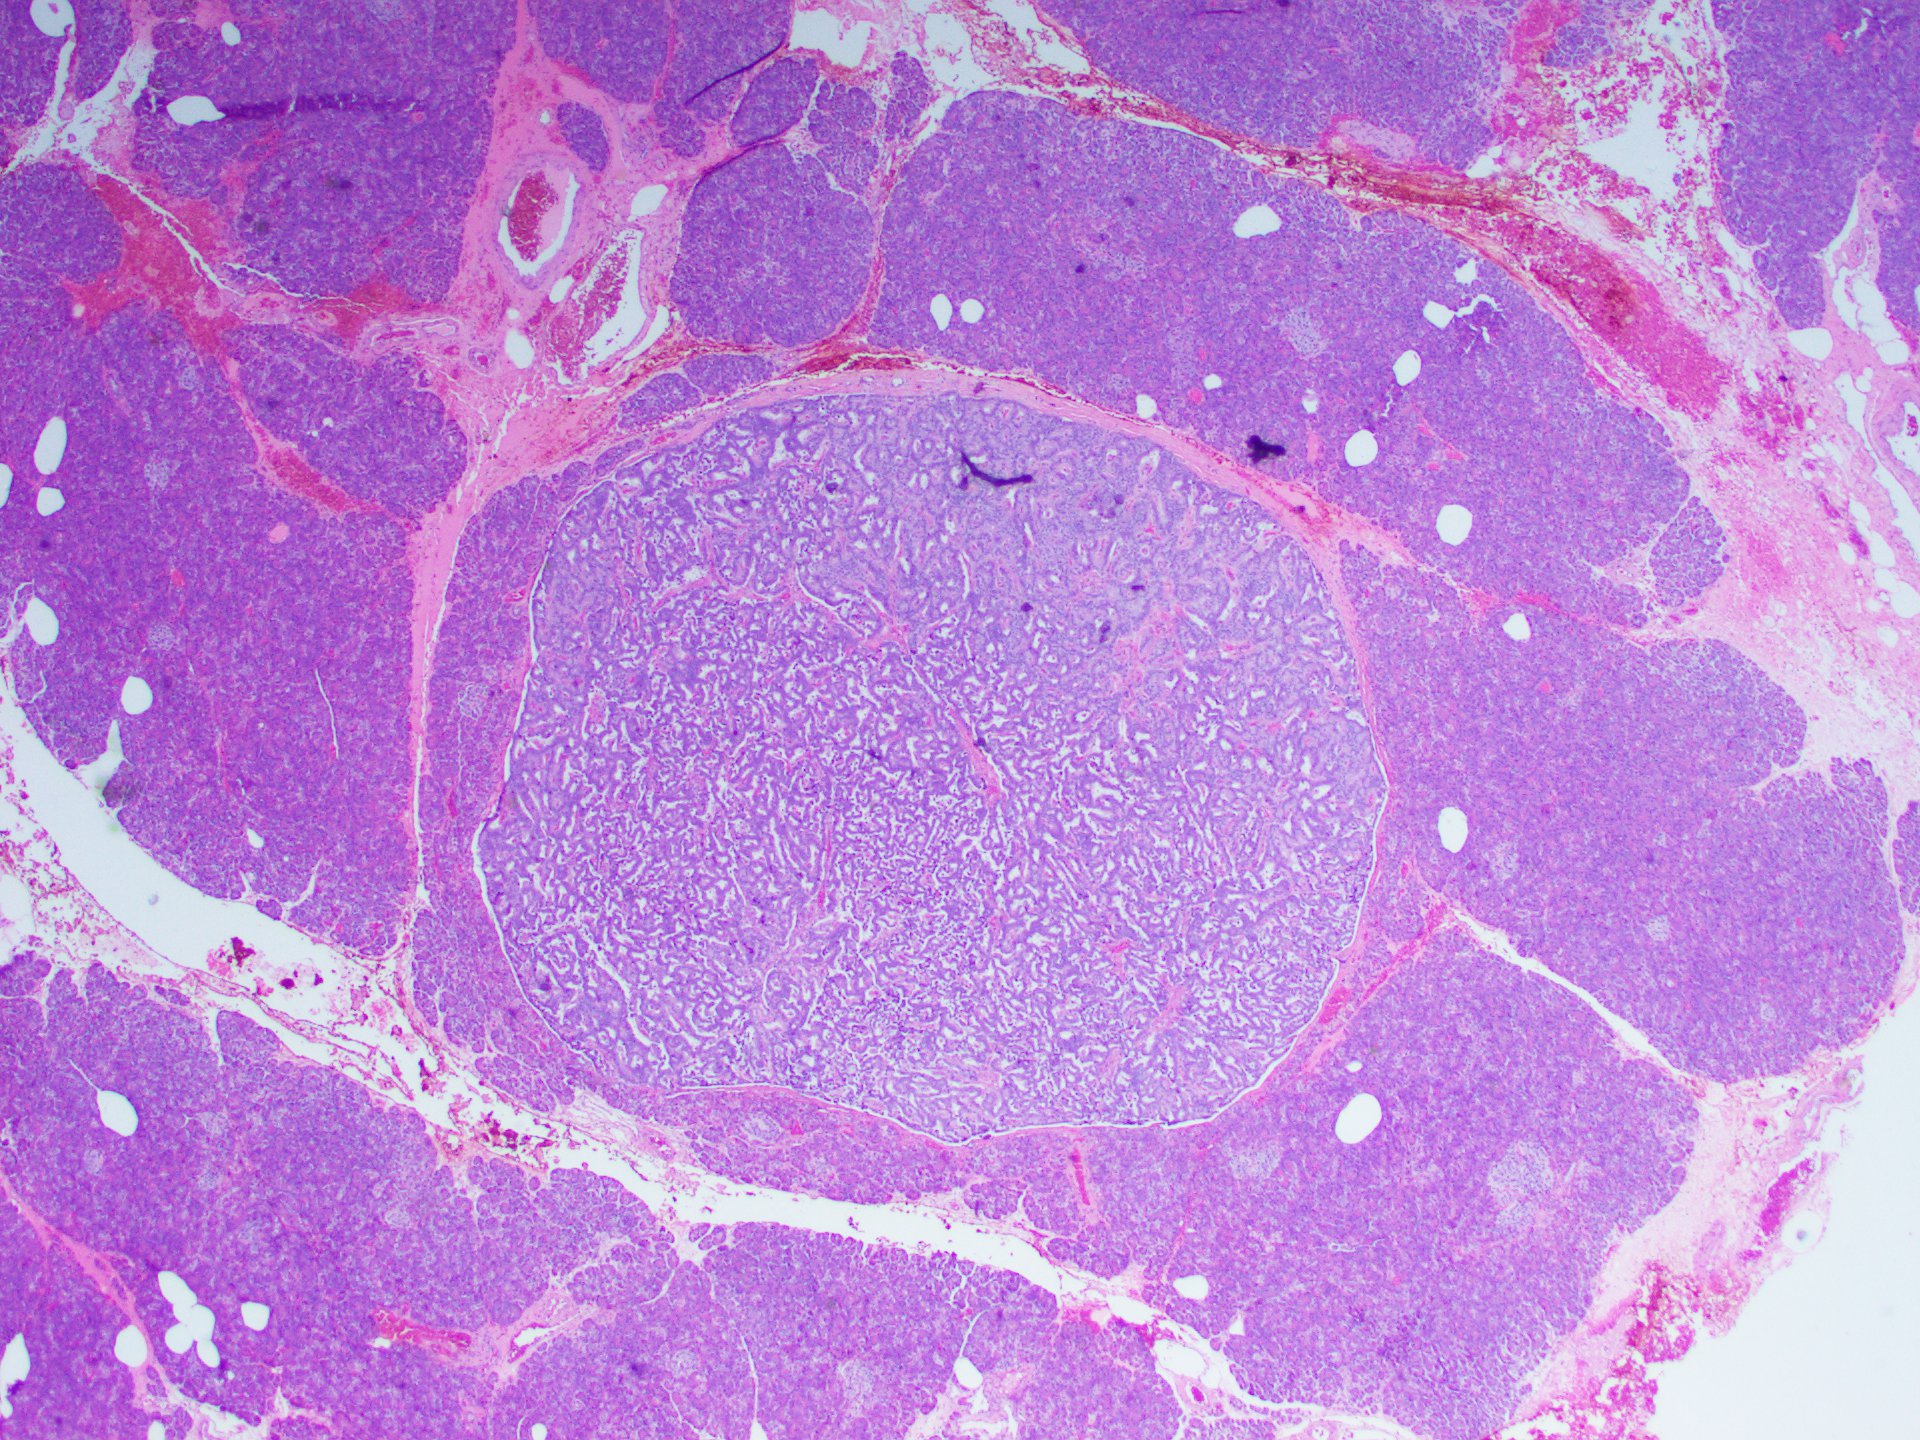 Figure 6: A microadenoma. Microadenomas have identical cytomorphology to PanNETs. Note the surrounding uninvolved pancreas. H&E x20.